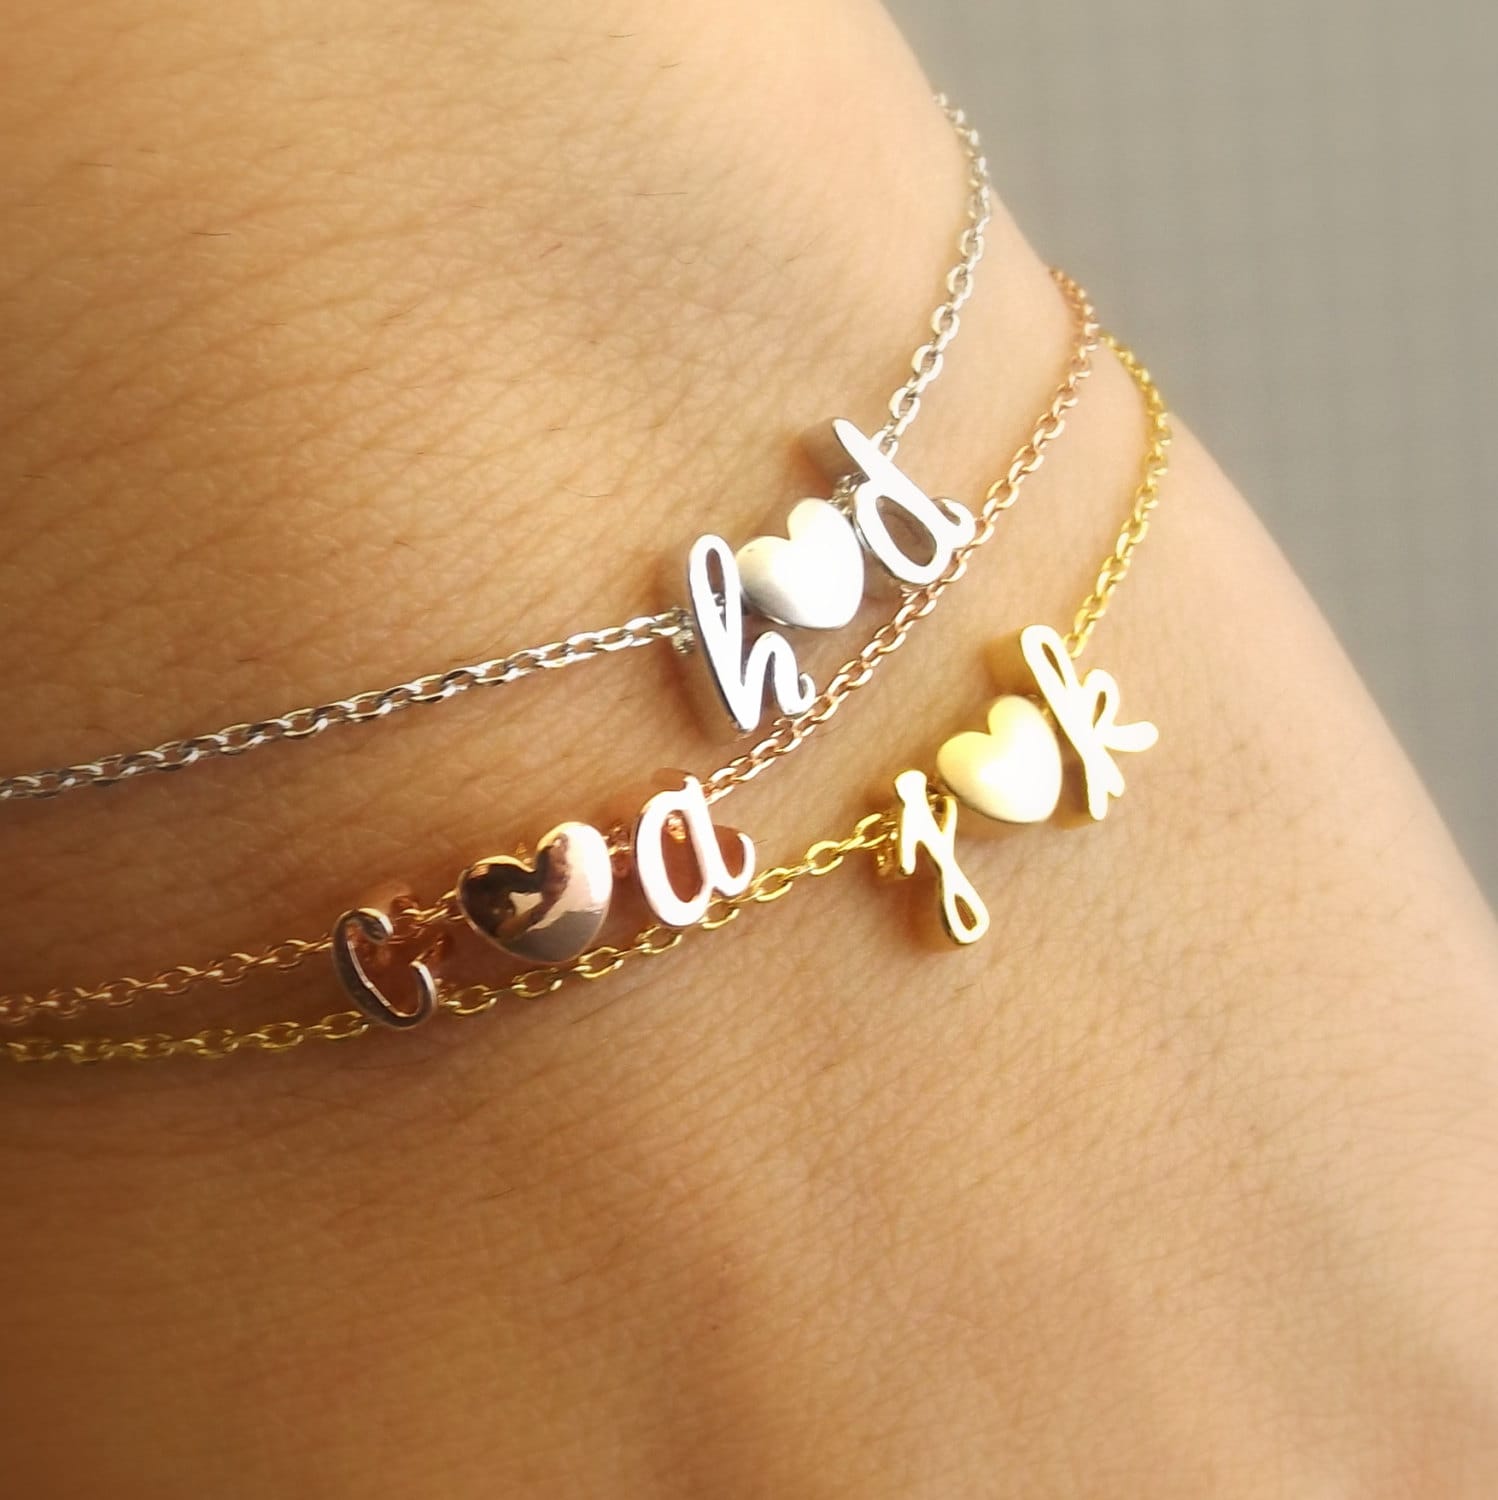 Personalized Name Bracelet - 16K Gold, Silver and Rose Gold Plated Silver / 03